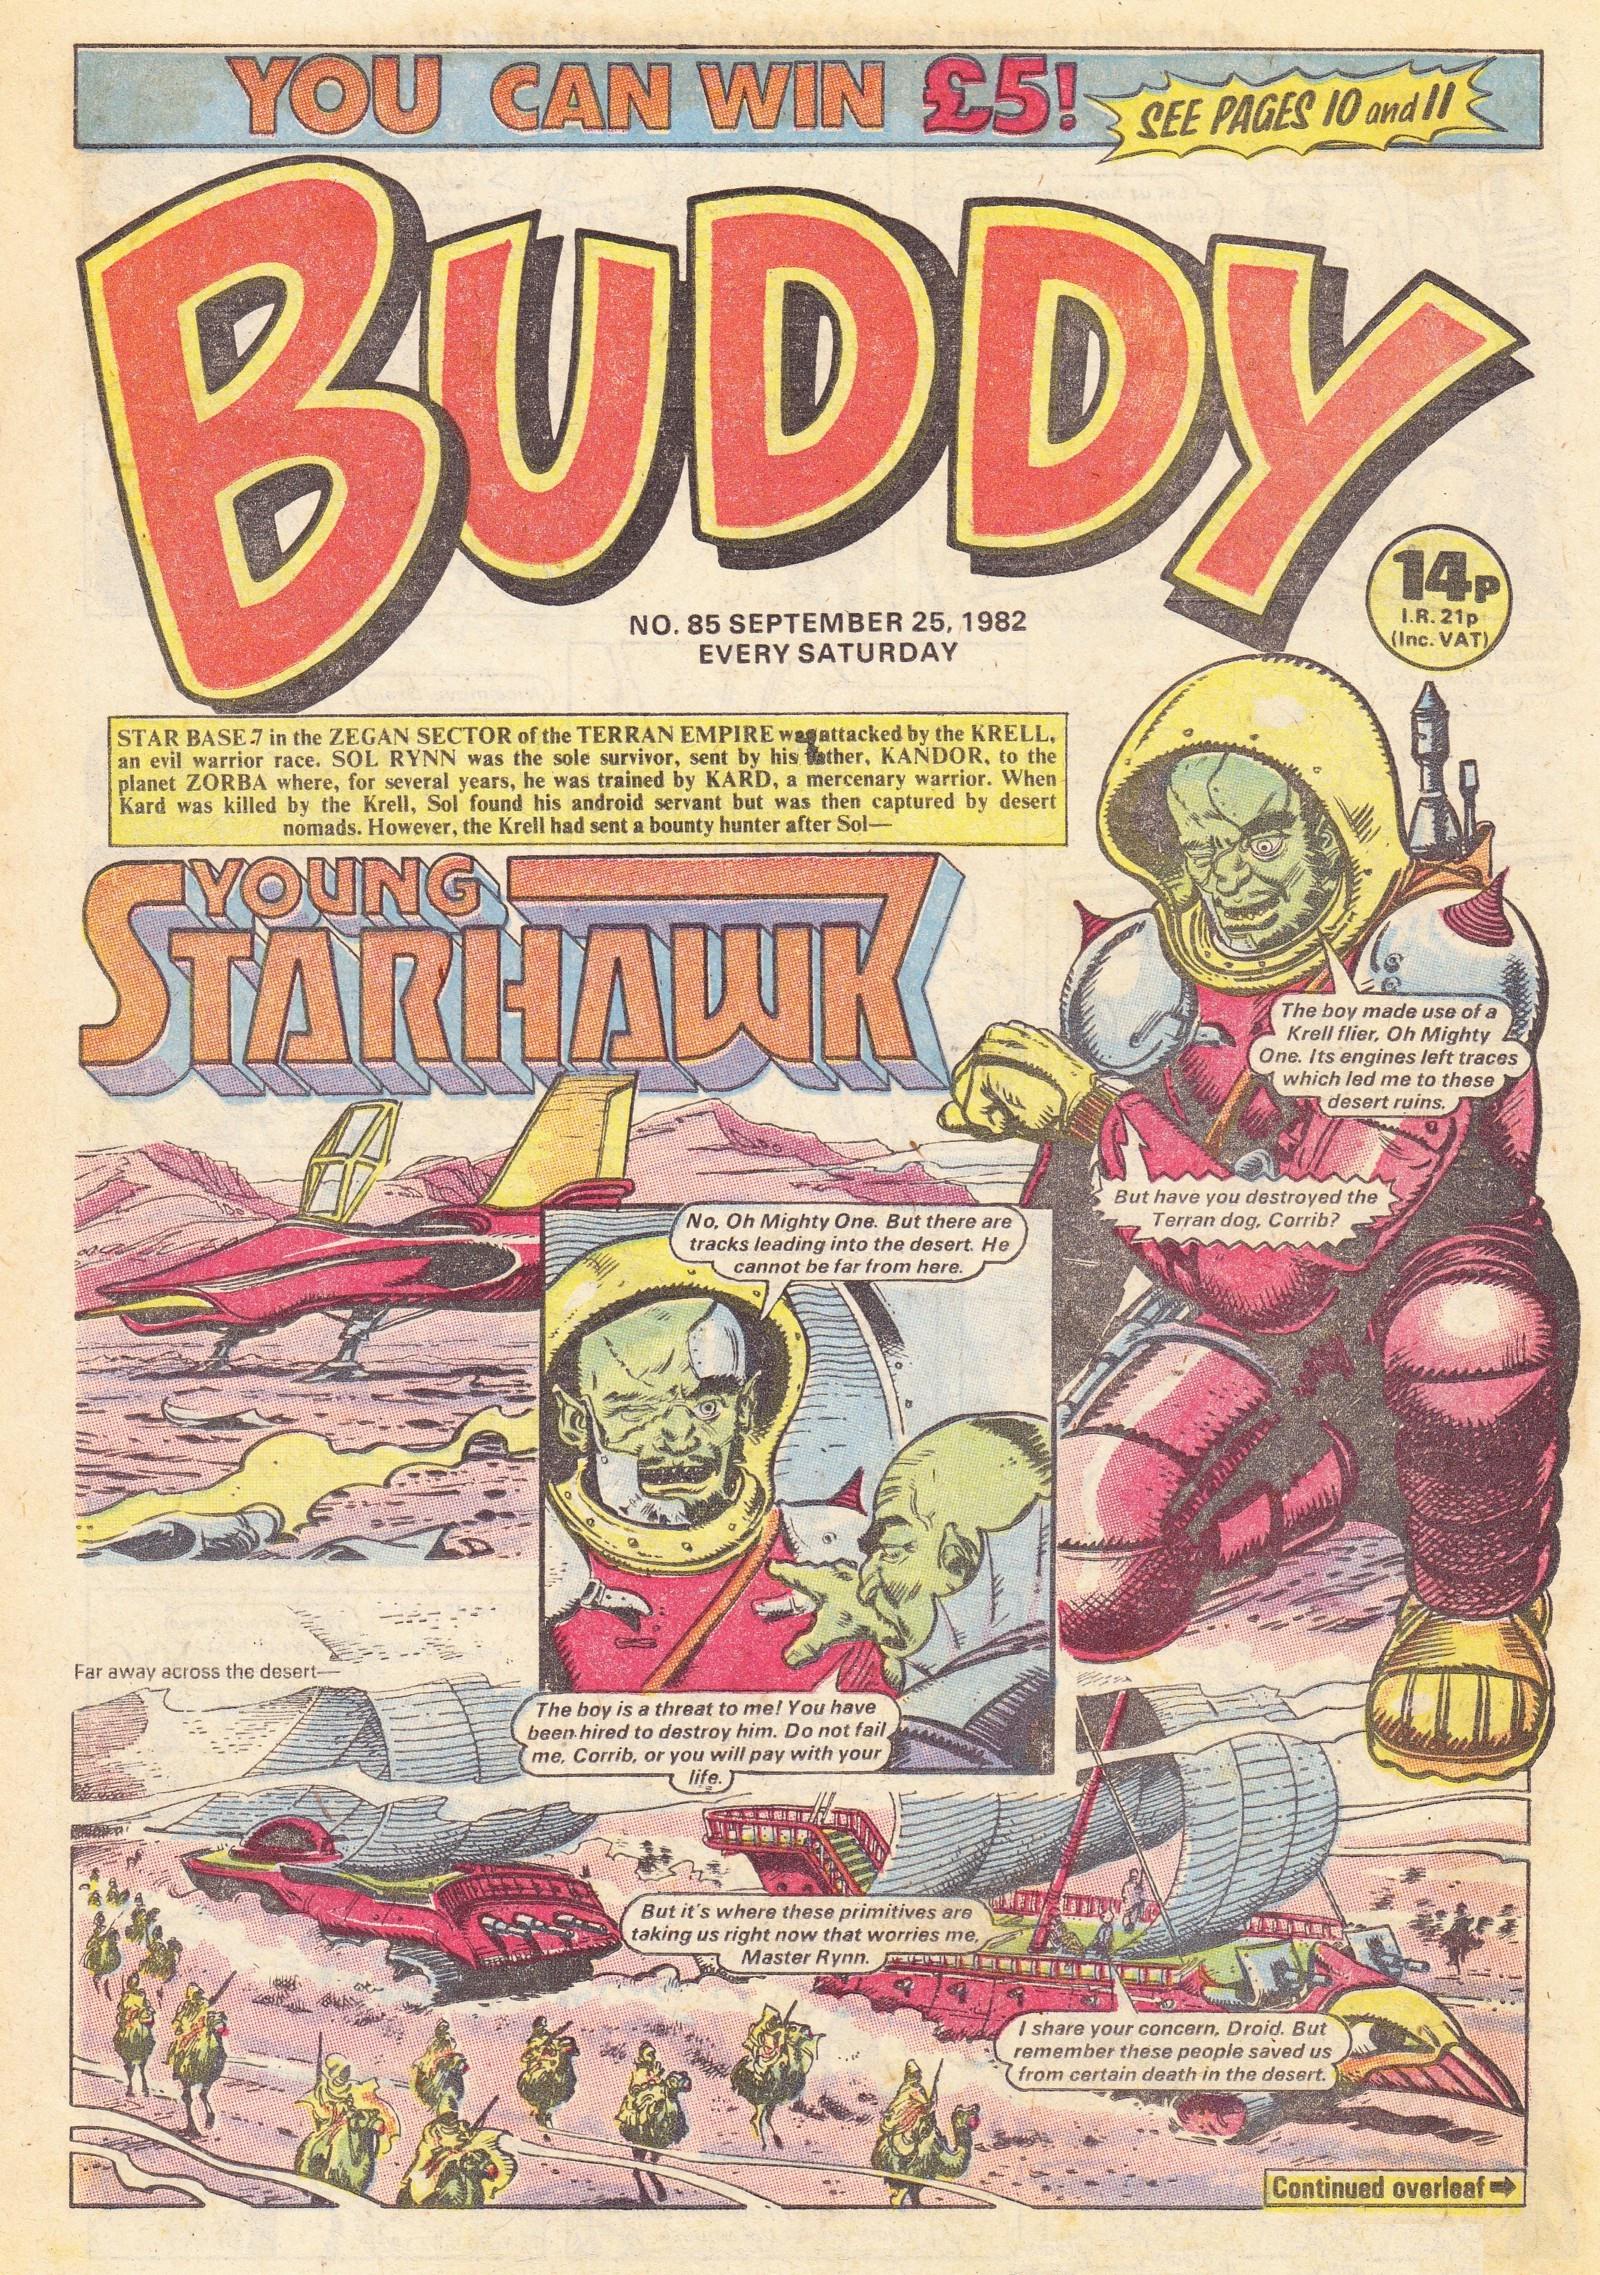 Read online Buddy comic -  Issue #85 - 1